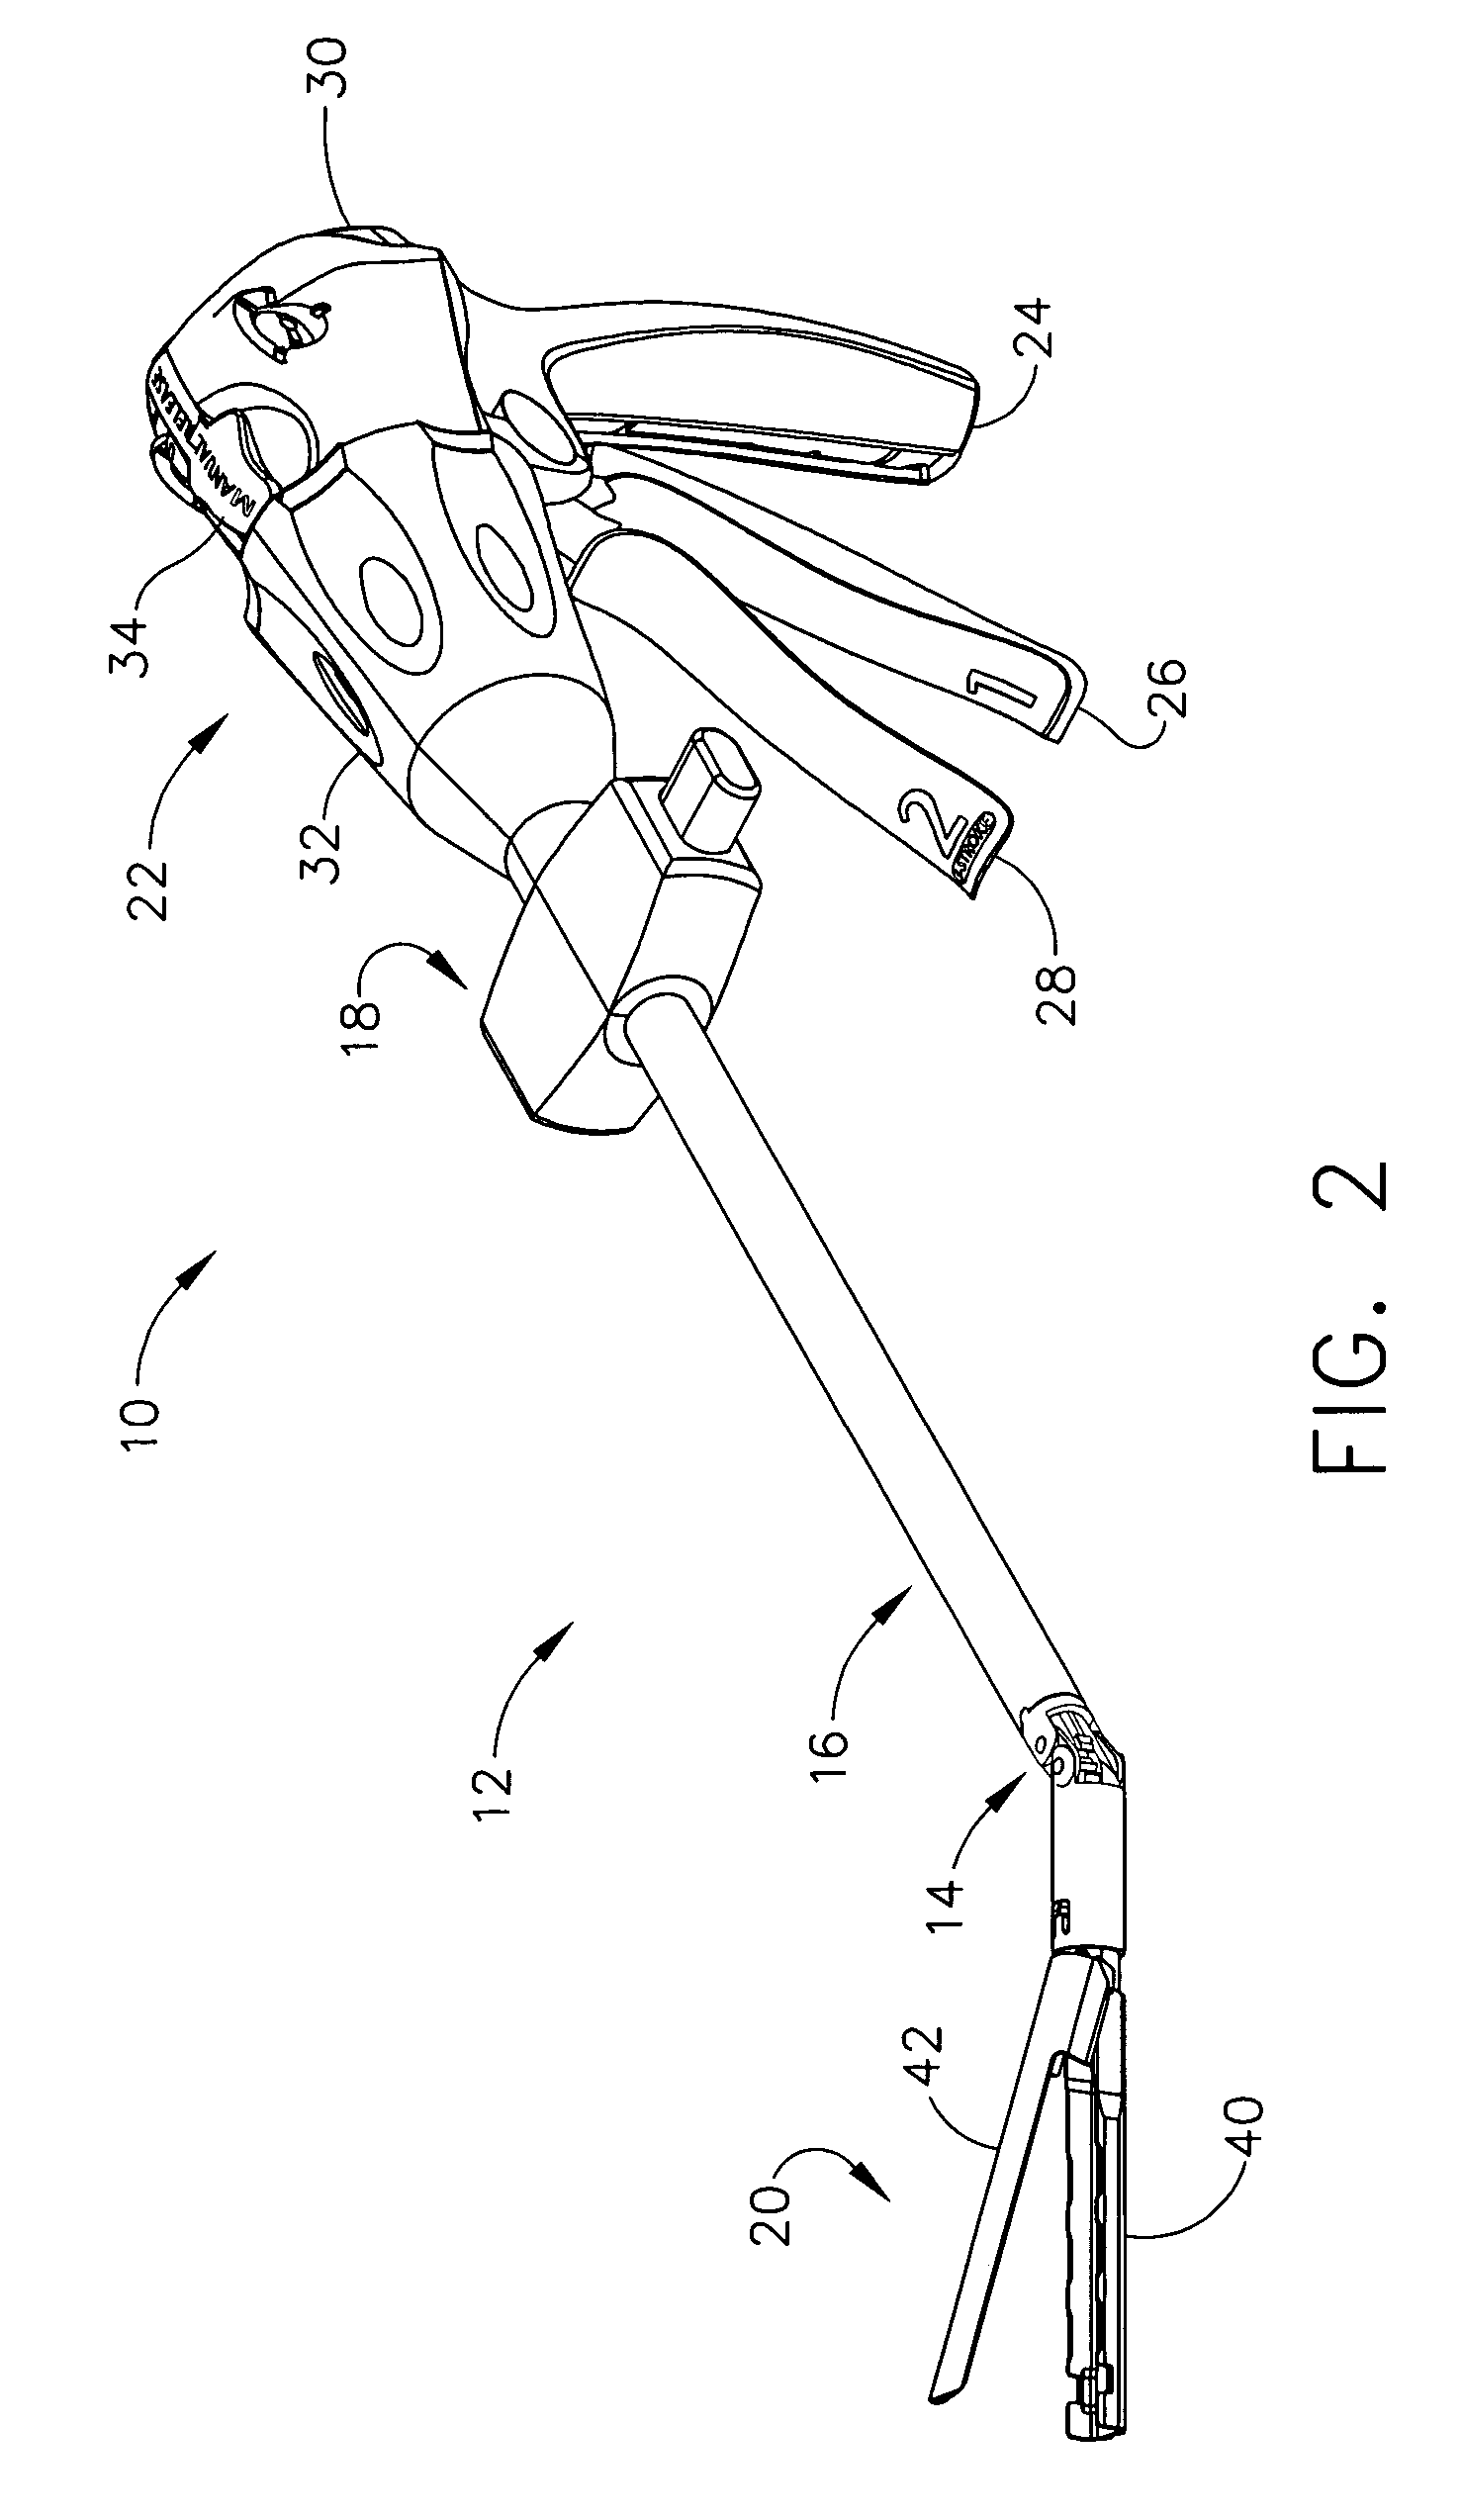 Surgical instrument with laterally moved shaft actuator coupled to pivoting articulation joint